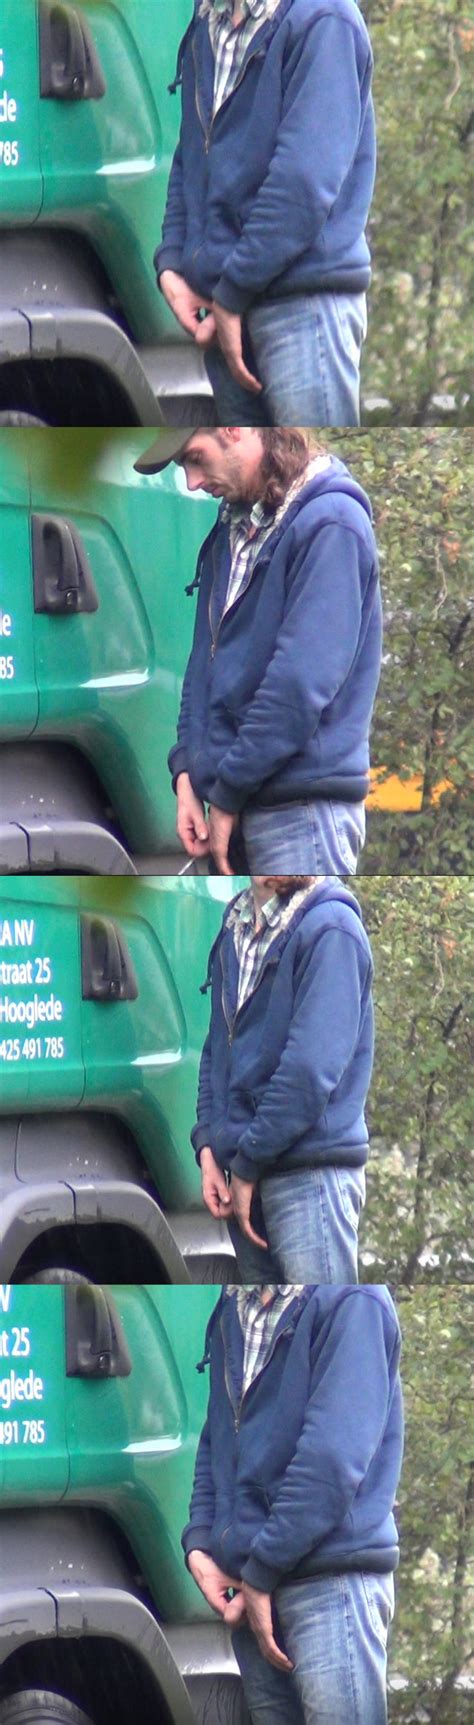 Trucker With Big Cock Caught Pissing Spycamfromguys Hidden Cams Spying On Men